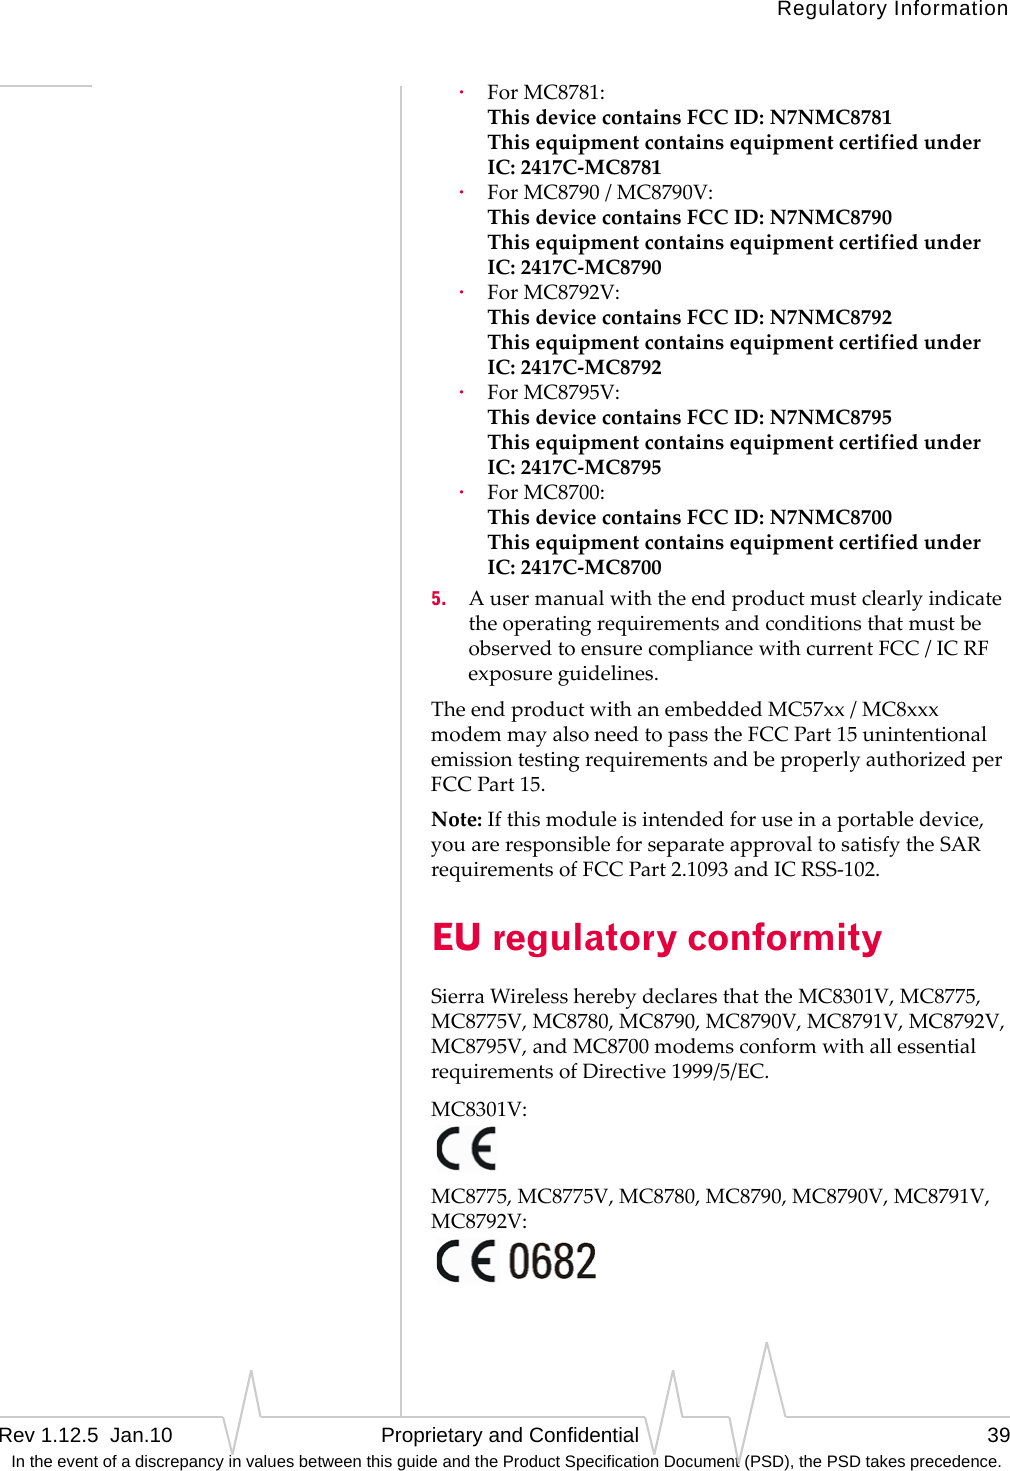 Regulatory InformationRev 1.12.5  Jan.10   Proprietary and Confidential 39 In the event of a discrepancy in values between this guide and the Product Specification Document (PSD), the PSD takes precedence.·ForMC8781: ThisdevicecontainsFCCID:N7NMC8781 ThisequipmentcontainsequipmentcertifiedunderIC:2417C‐MC8781·ForMC8790/MC8790V: ThisdevicecontainsFCCID:N7NMC8790 ThisequipmentcontainsequipmentcertifiedunderIC:2417C‐MC8790·ForMC8792V: ThisdevicecontainsFCCID:N7NMC8792 ThisequipmentcontainsequipmentcertifiedunderIC:2417C‐MC8792·ForMC8795V: ThisdevicecontainsFCCID:N7NMC8795 ThisequipmentcontainsequipmentcertifiedunderIC:2417C‐MC8795·ForMC8700: ThisdevicecontainsFCCID:N7NMC8700 ThisequipmentcontainsequipmentcertifiedunderIC:2417C‐MC87005. AusermanualwiththeendproductmustclearlyindicatetheoperatingrequirementsandconditionsthatmustbeobservedtoensurecompliancewithcurrentFCC/ICRFexposureguidelines.TheendproductwithanembeddedMC57xx/MC8xxxmodemmayalsoneedtopasstheFCCPart15unintentionalemissiontestingrequirementsandbeproperlyauthorizedperFCCPart15.Note:Ifthismoduleisintendedforuseinaportabledevice,youareresponsibleforseparateapprovaltosatisfytheSARrequirementsofFCCPart2.1093andICRSS‐102.EU regulatory conformitySierraWirelessherebydeclaresthattheMC8301V,MC8775,MC8775V,MC8780,MC8790,MC8790V,MC8791V,MC8792V,MC8795V,andMC8700modemsconformwithallessentialrequirementsofDirective1999/5/EC.MC8301V:MC8775,MC8775V,MC8780,MC8790,MC8790V,MC8791V,MC8792V: